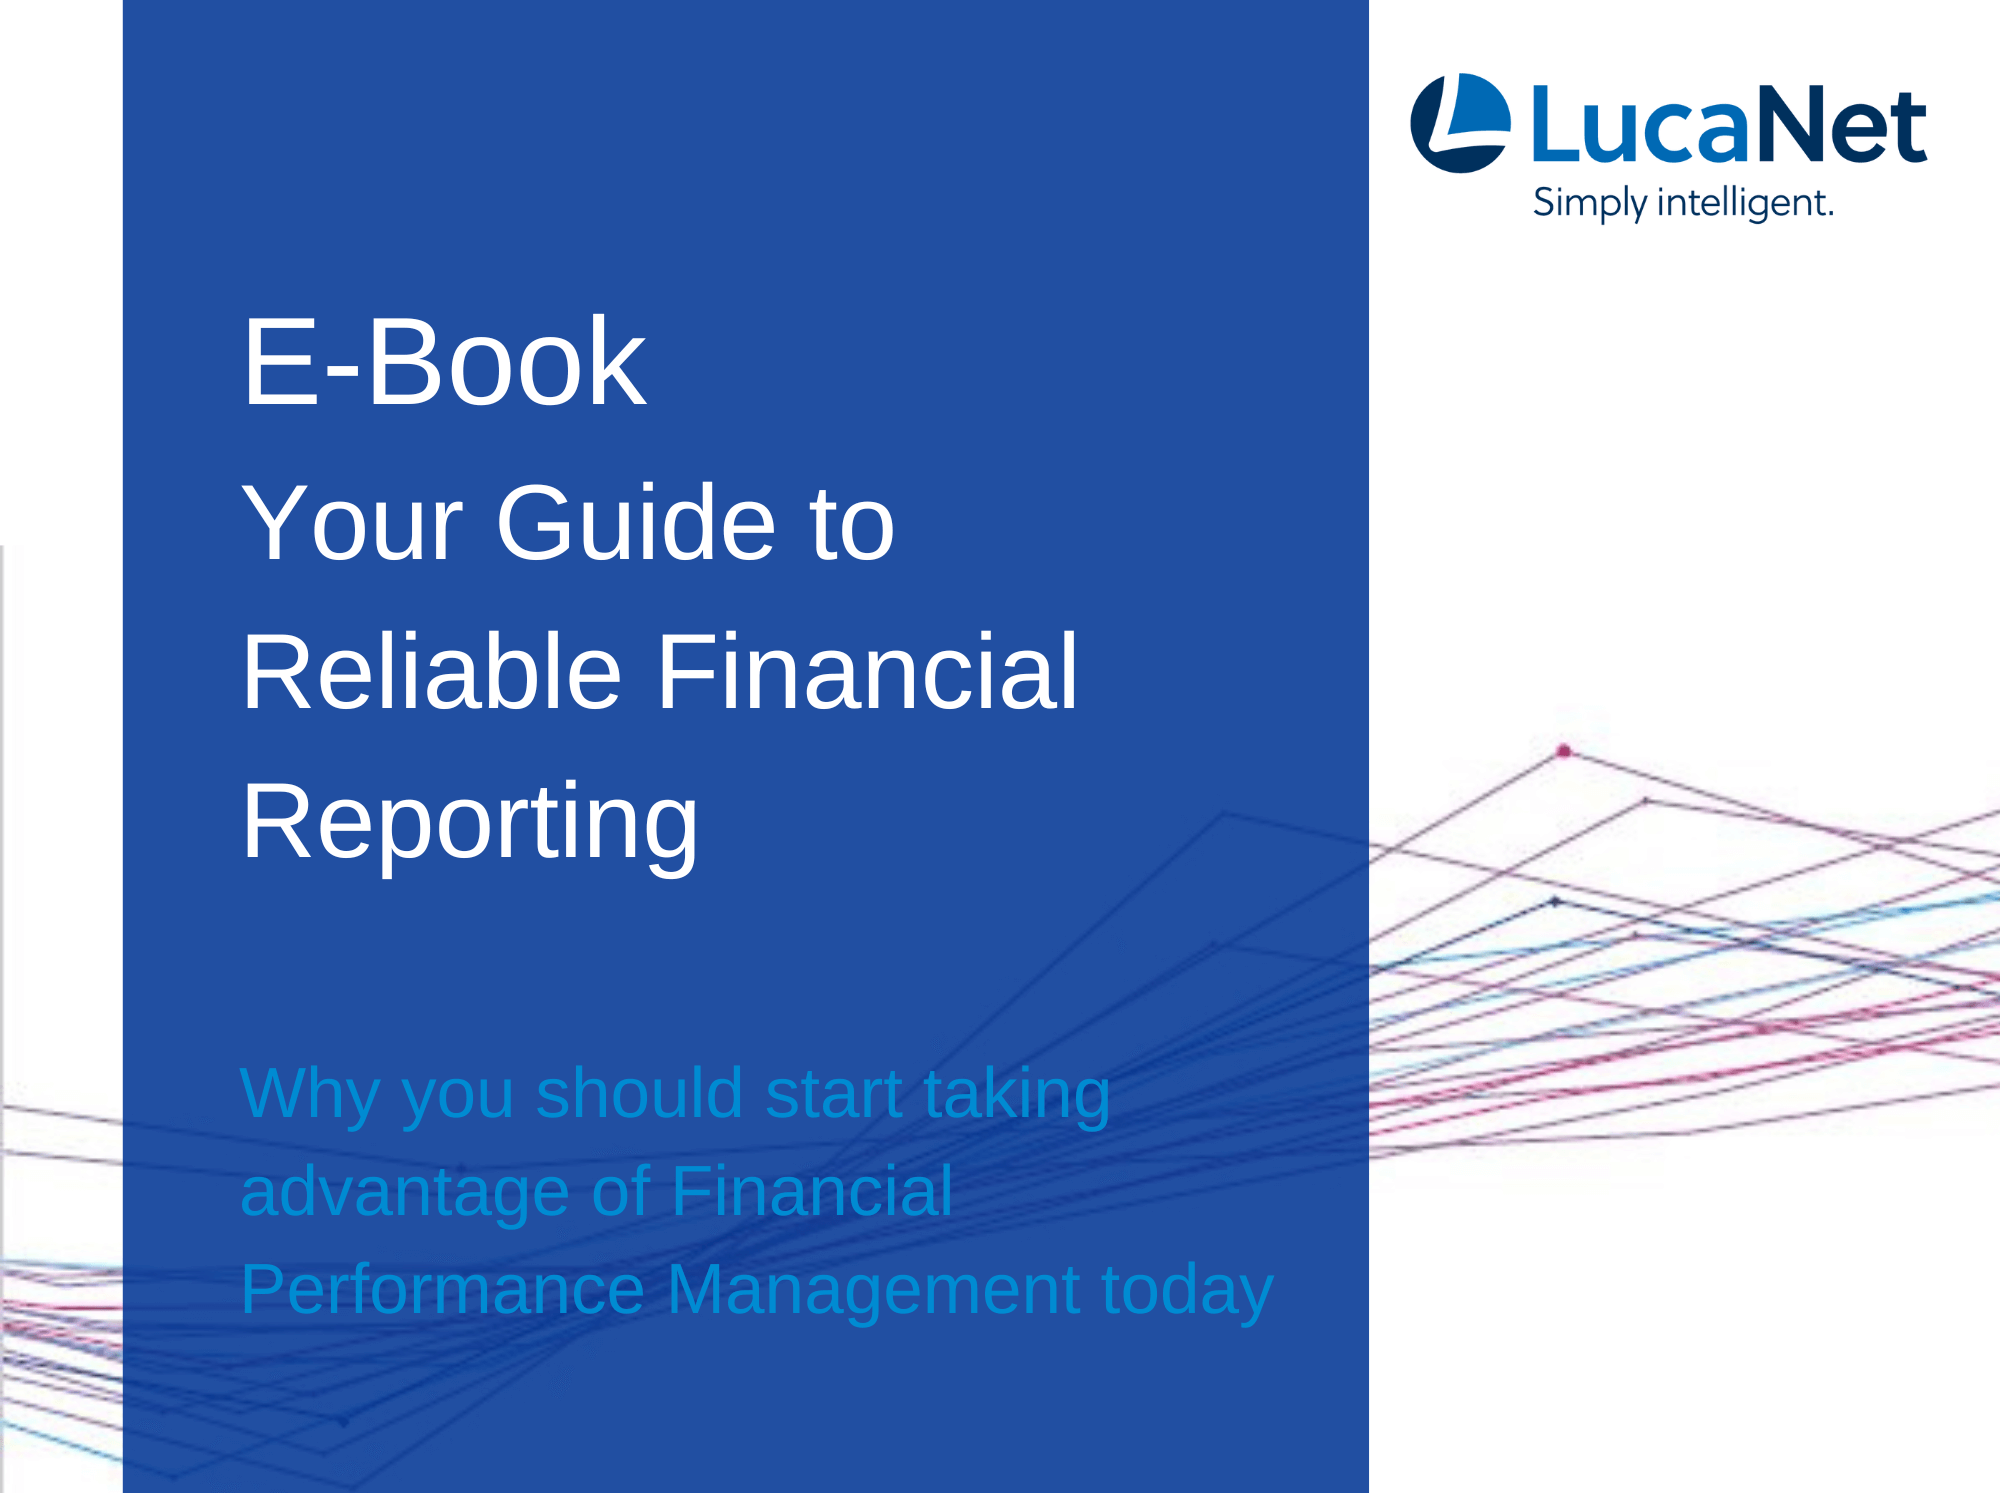 LucaNet E-Book: Your Guide to Reliable Financial Reporting